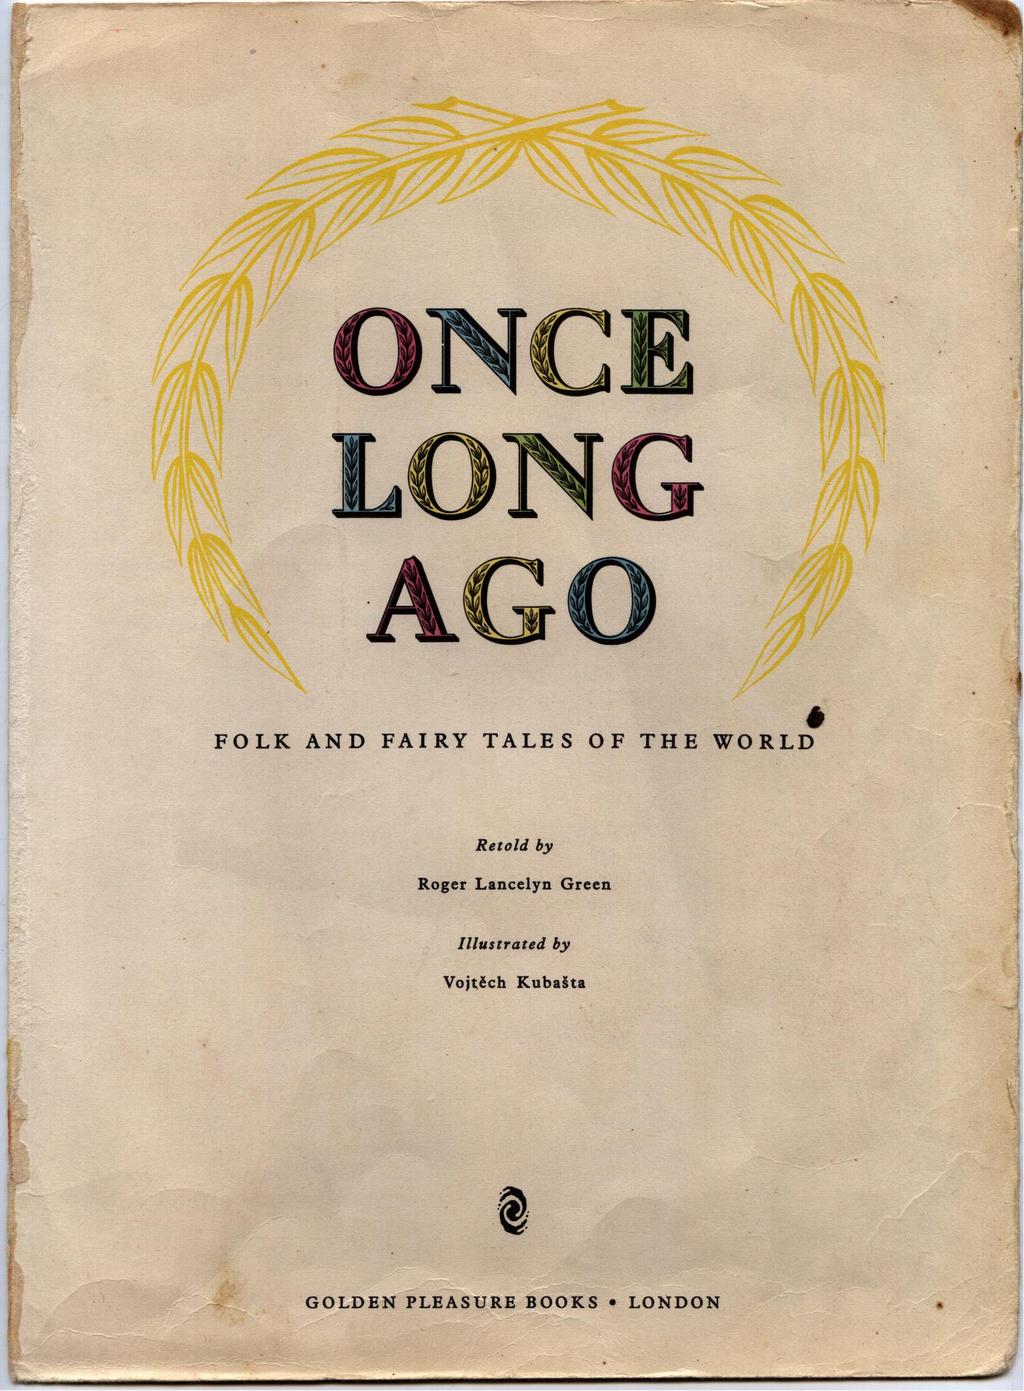 ONCE LONG AGO FOLK AND FAIRY TALES OF THE WORLD Retold by Roger